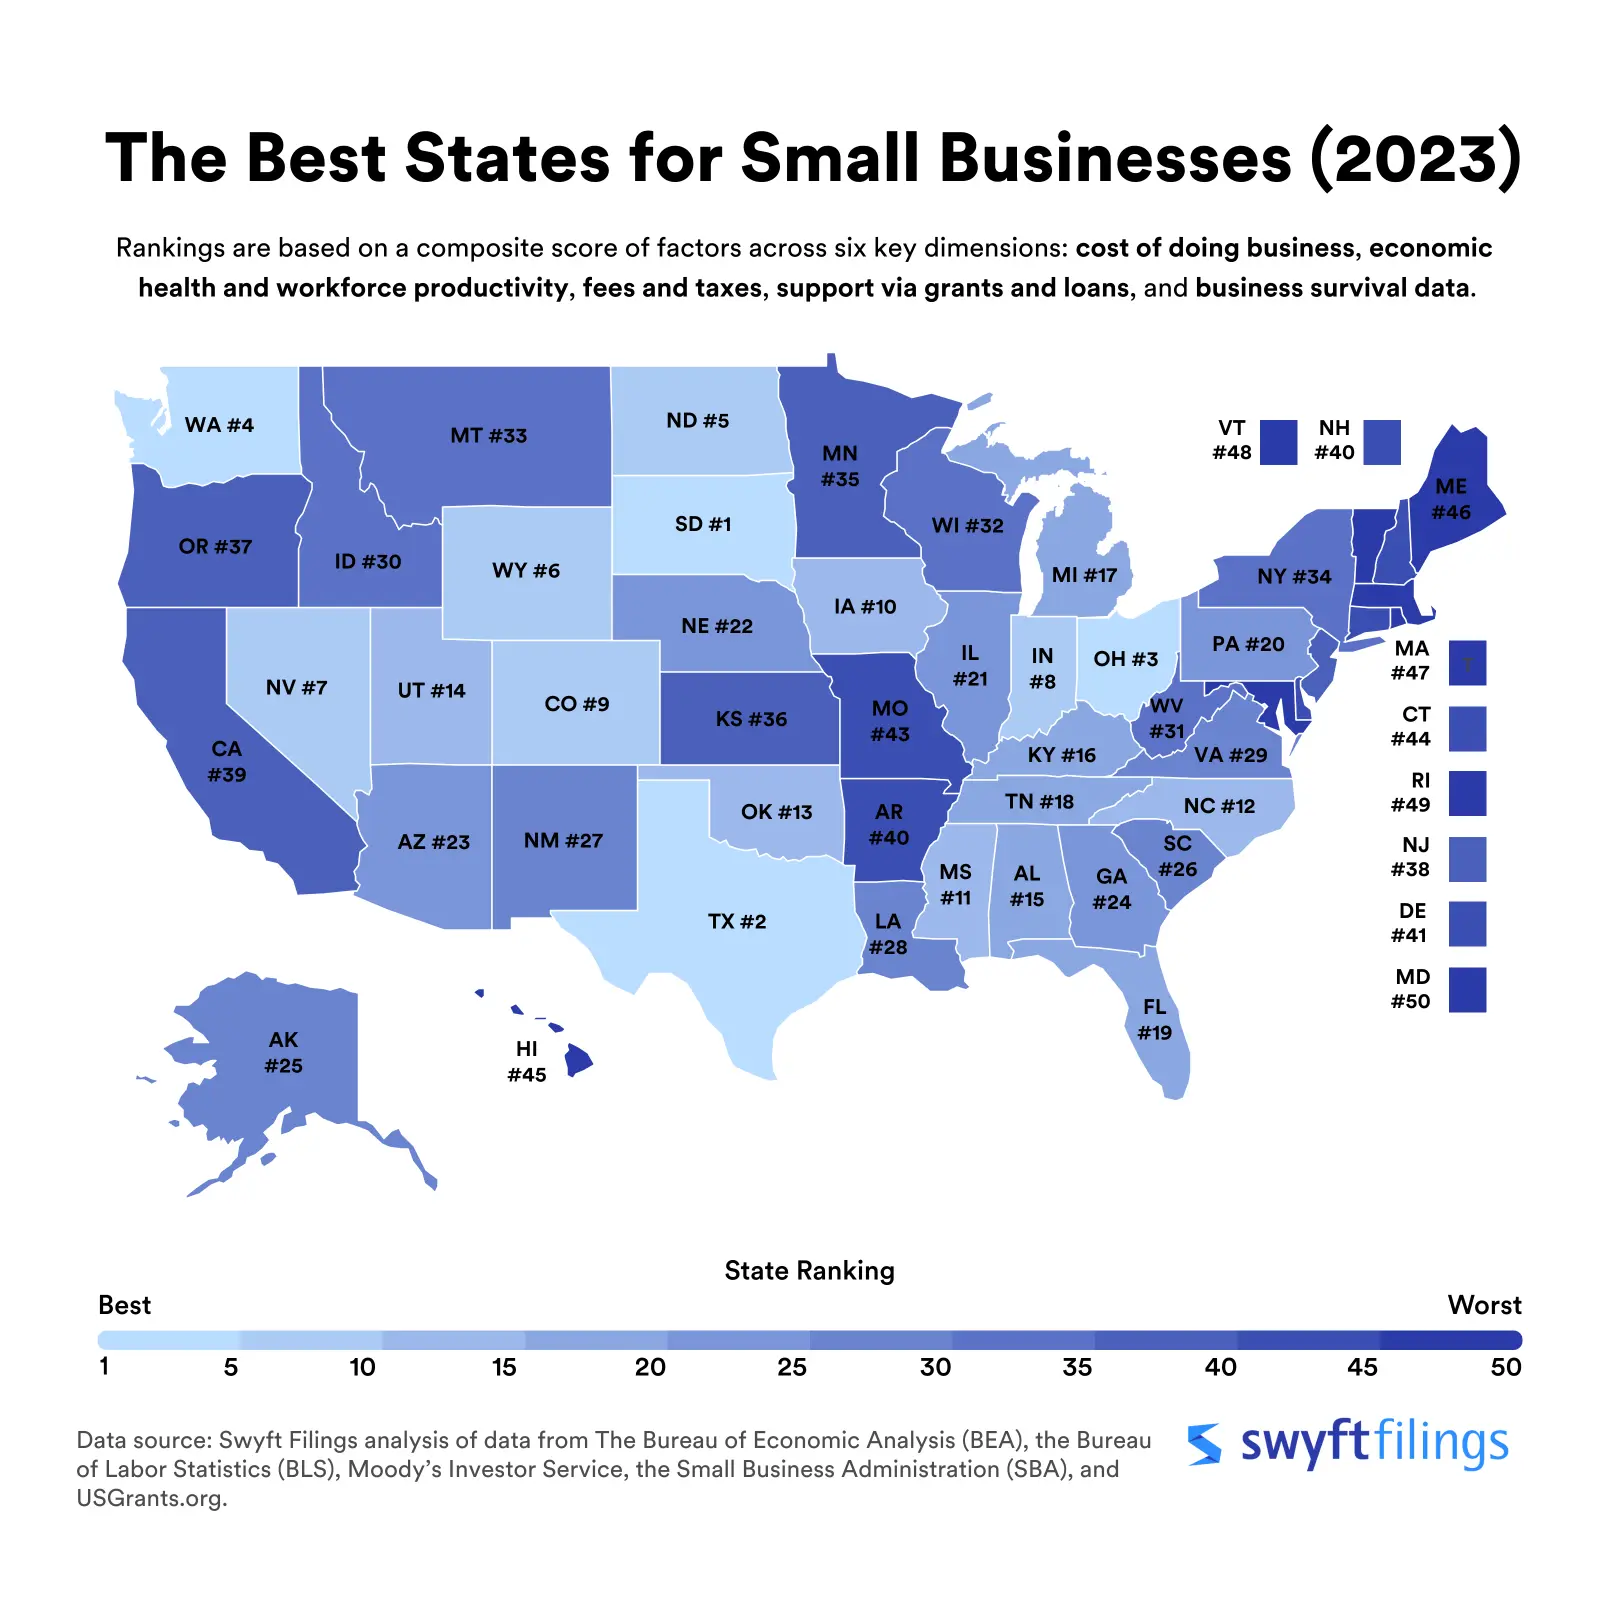 heat map featuring the best and worst states for small businesses in 2023